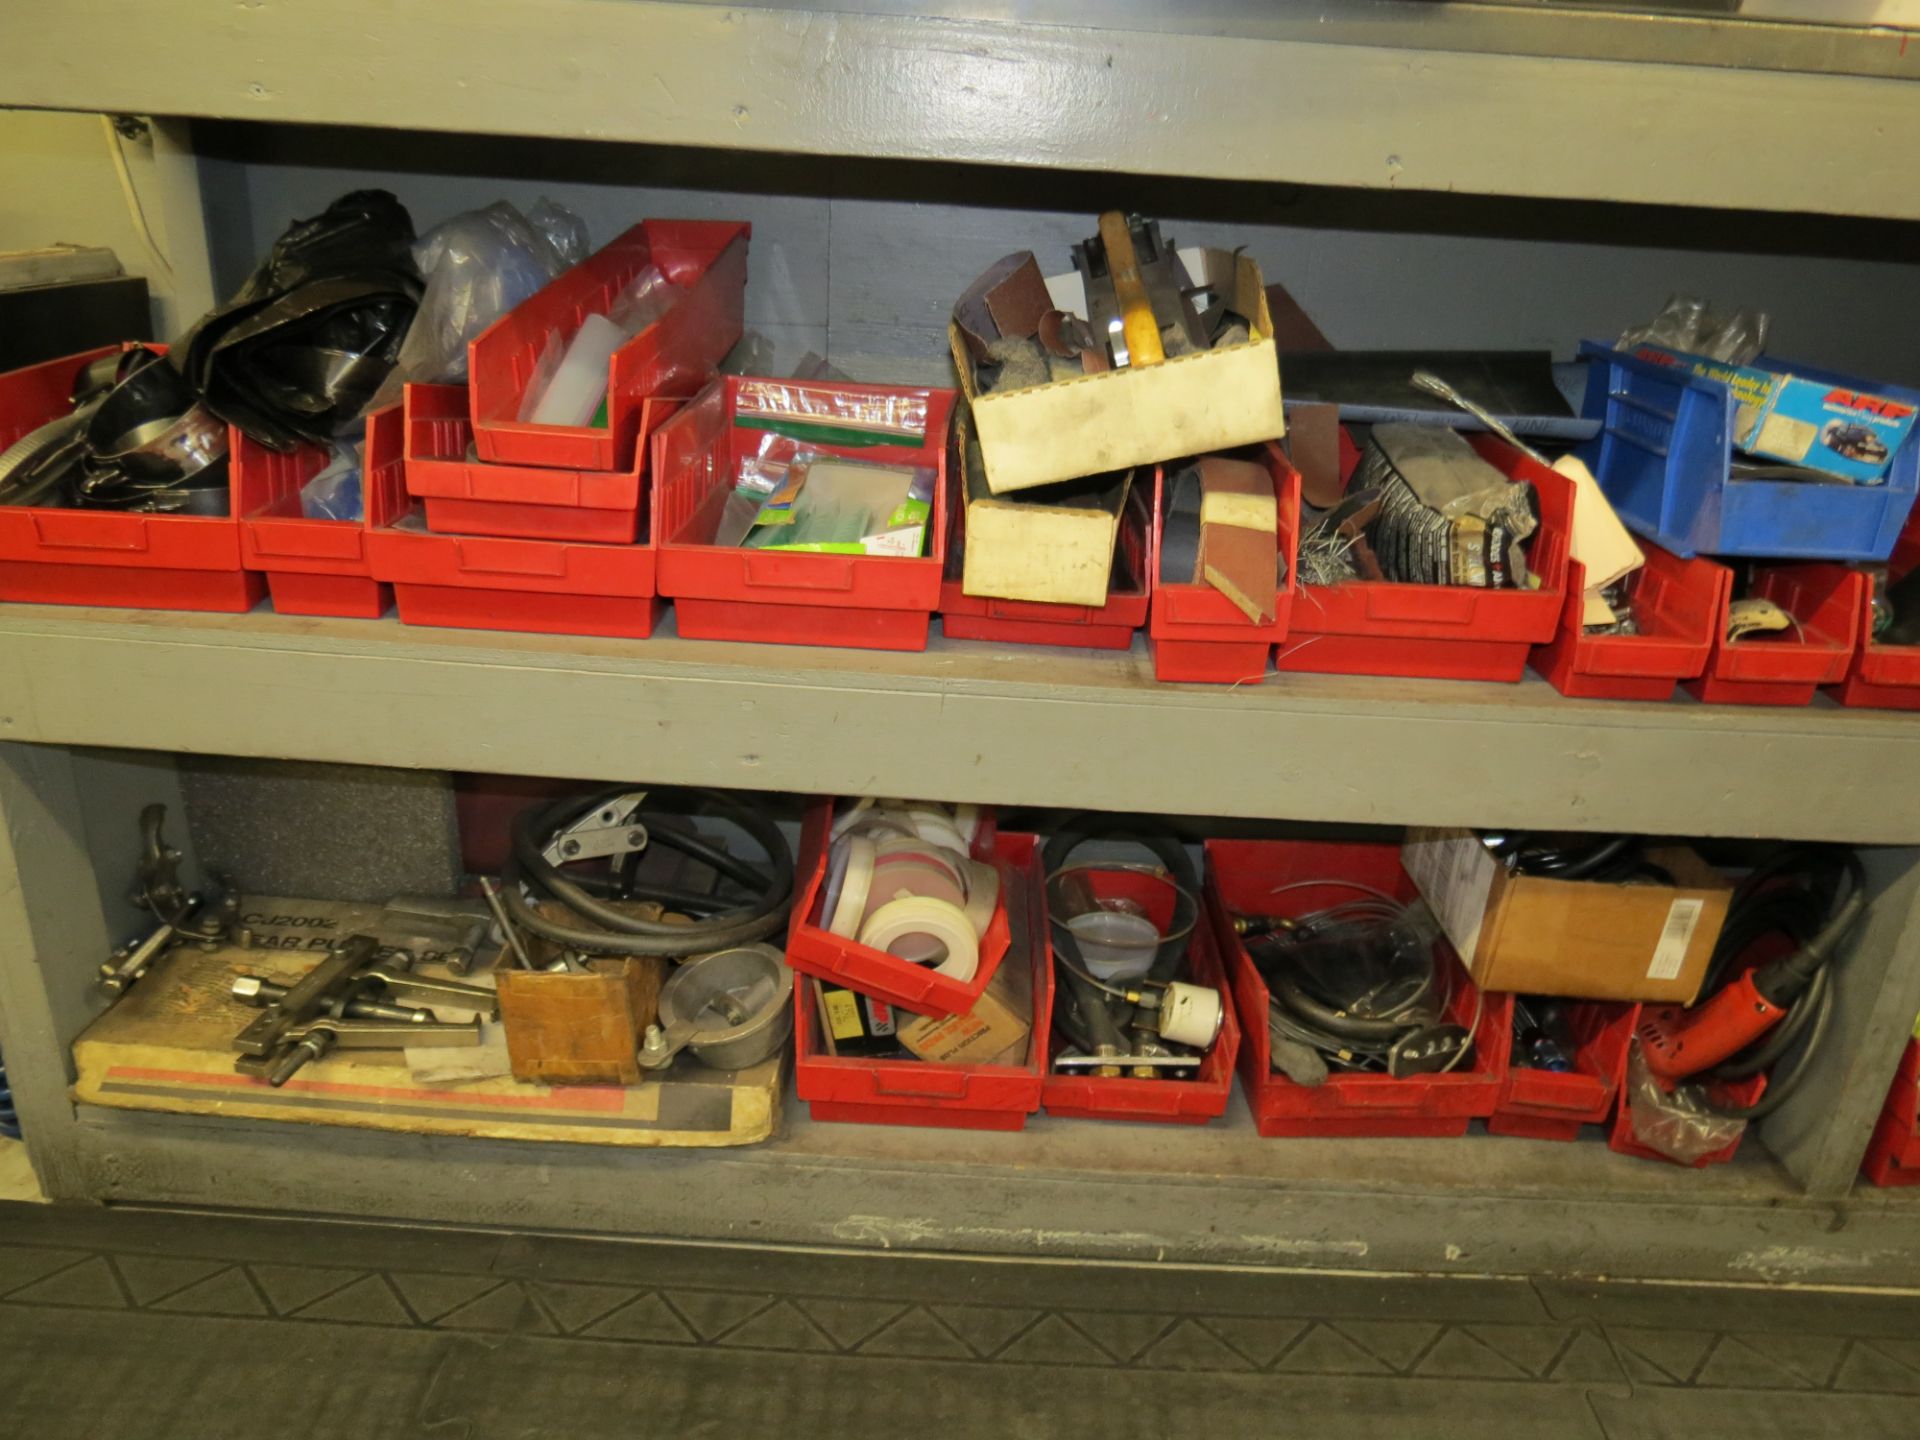 LOT OF ASSORTED TOOLS AND PARTS BELOW BENCH - Image 3 of 4